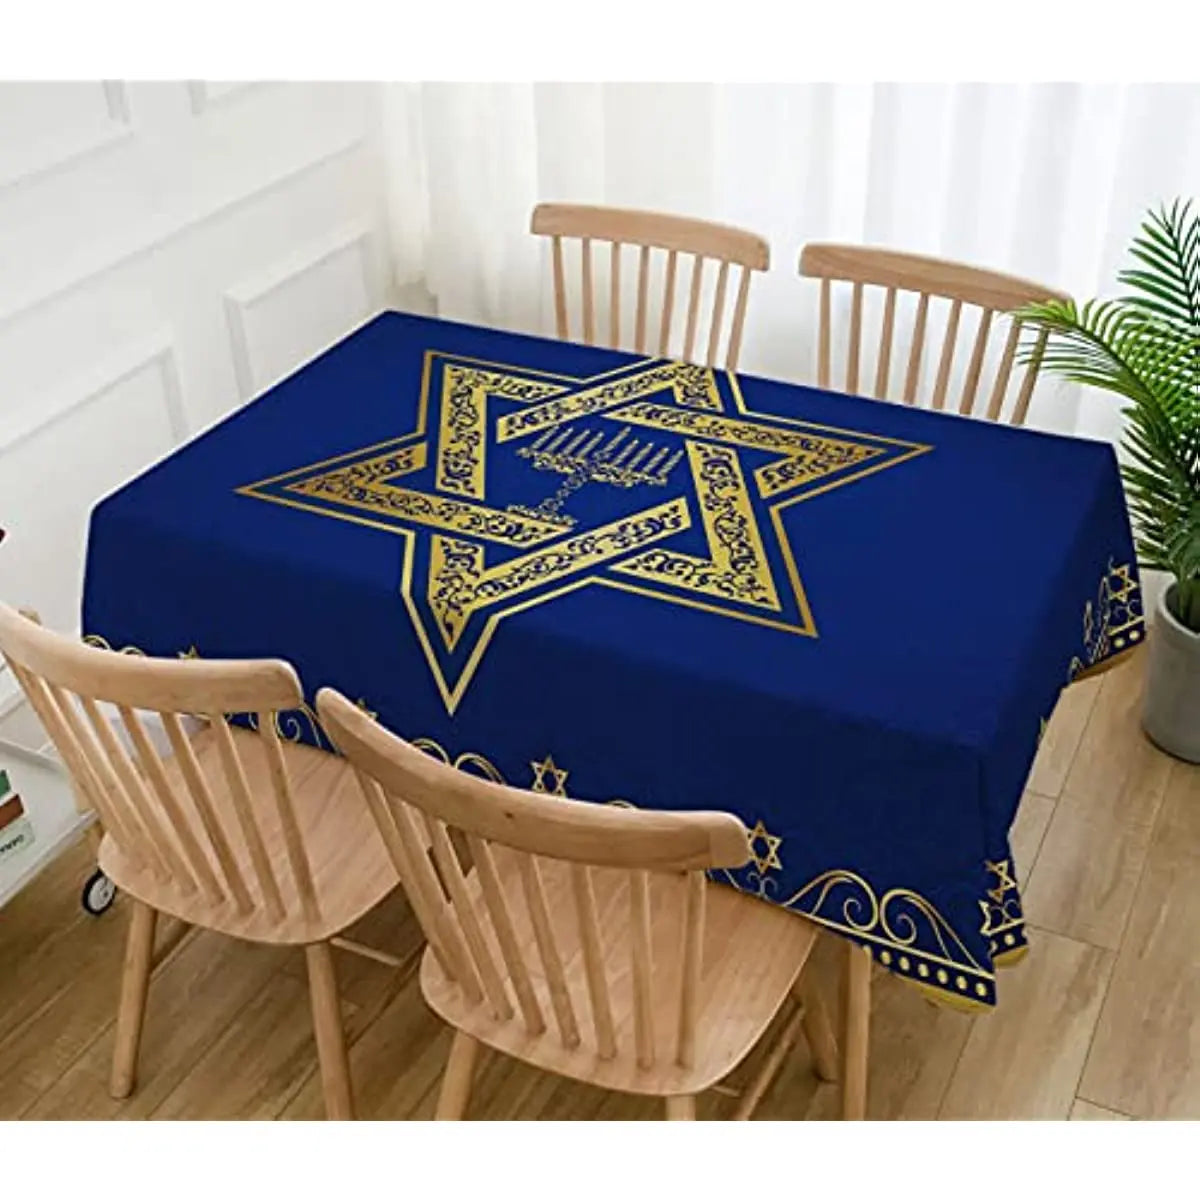 Ancient Israel Tablecloth - Waterproof Polyester Gold & Blue Star Of David